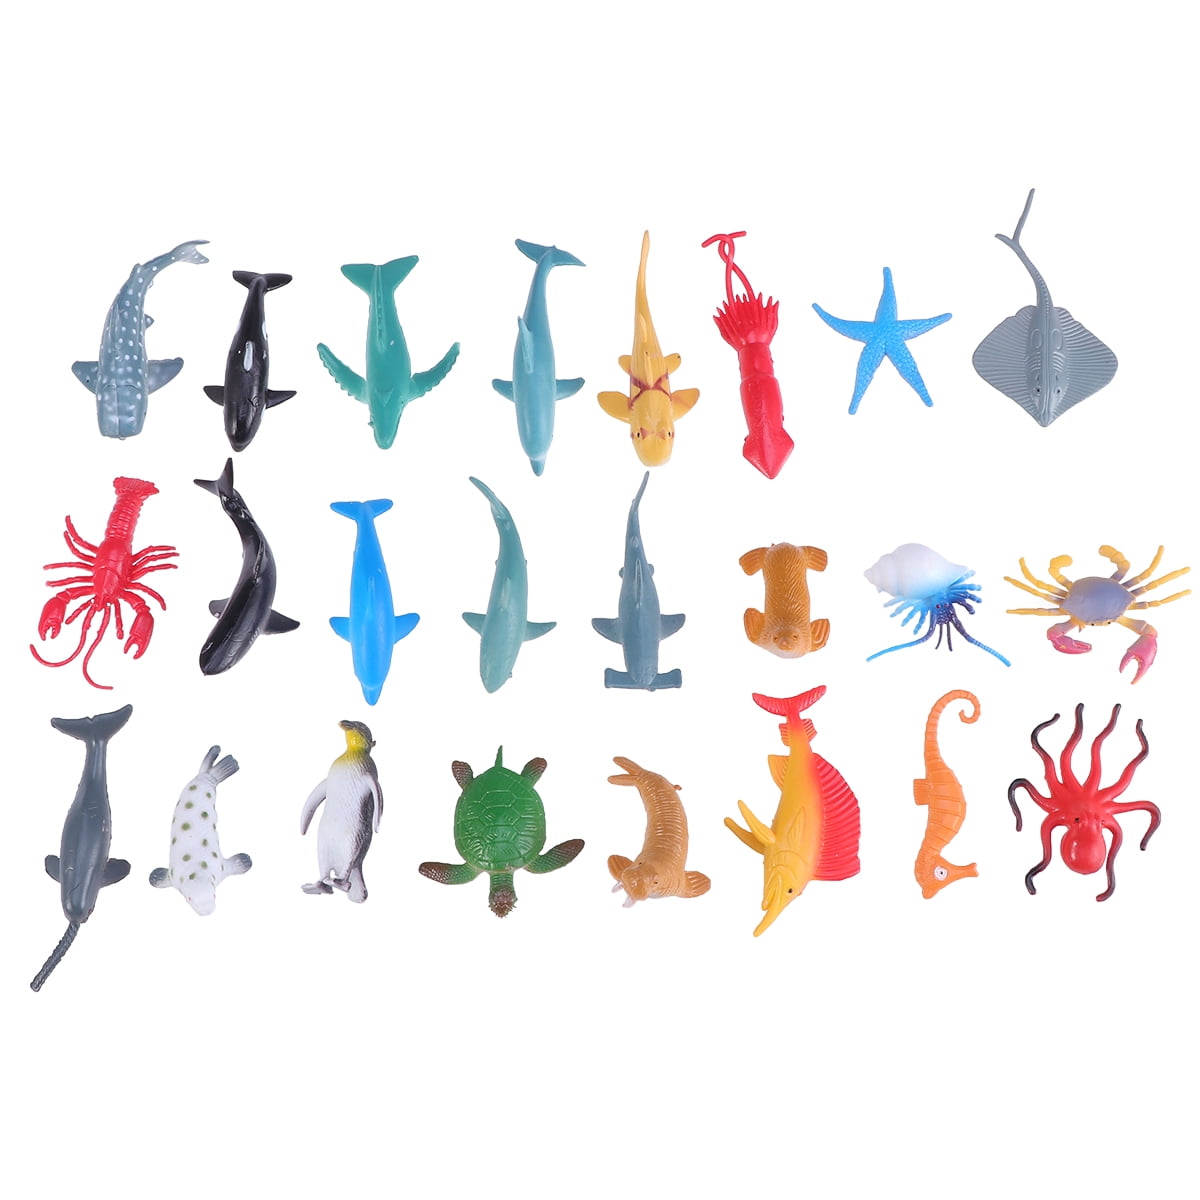 Ocean Animal Figure Model Party Favors for Kids Educational Resource Toys 